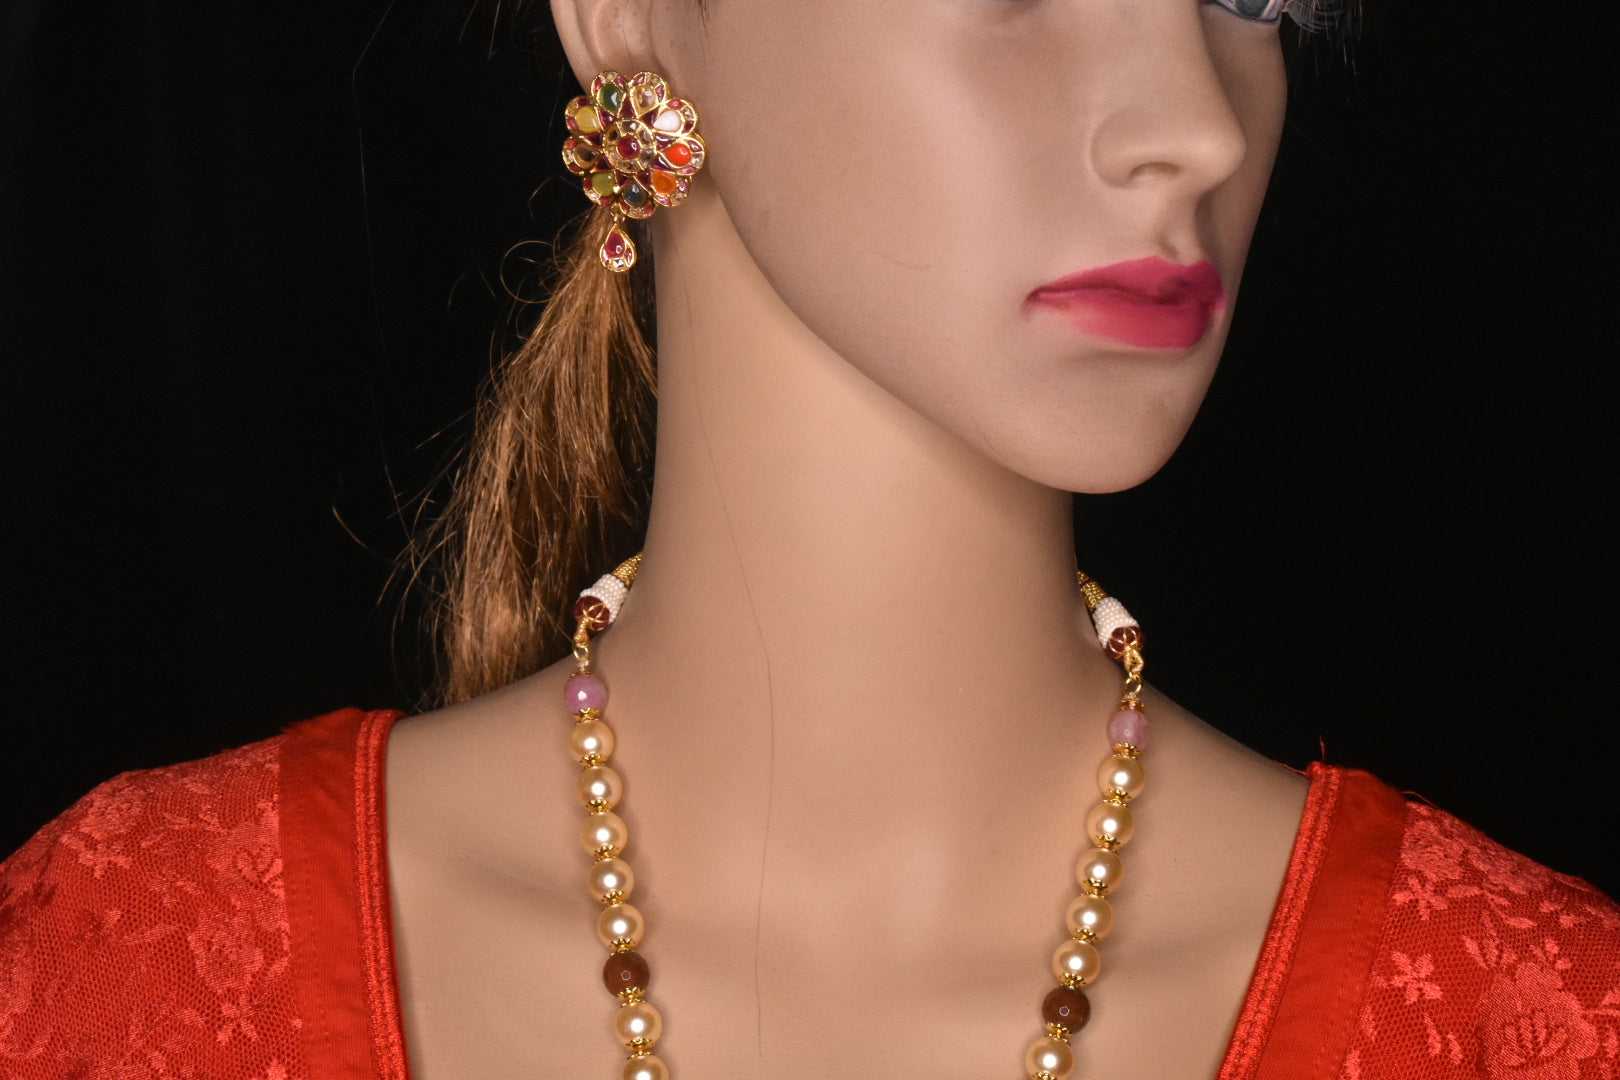 Navratna pendent with pearls Necklace